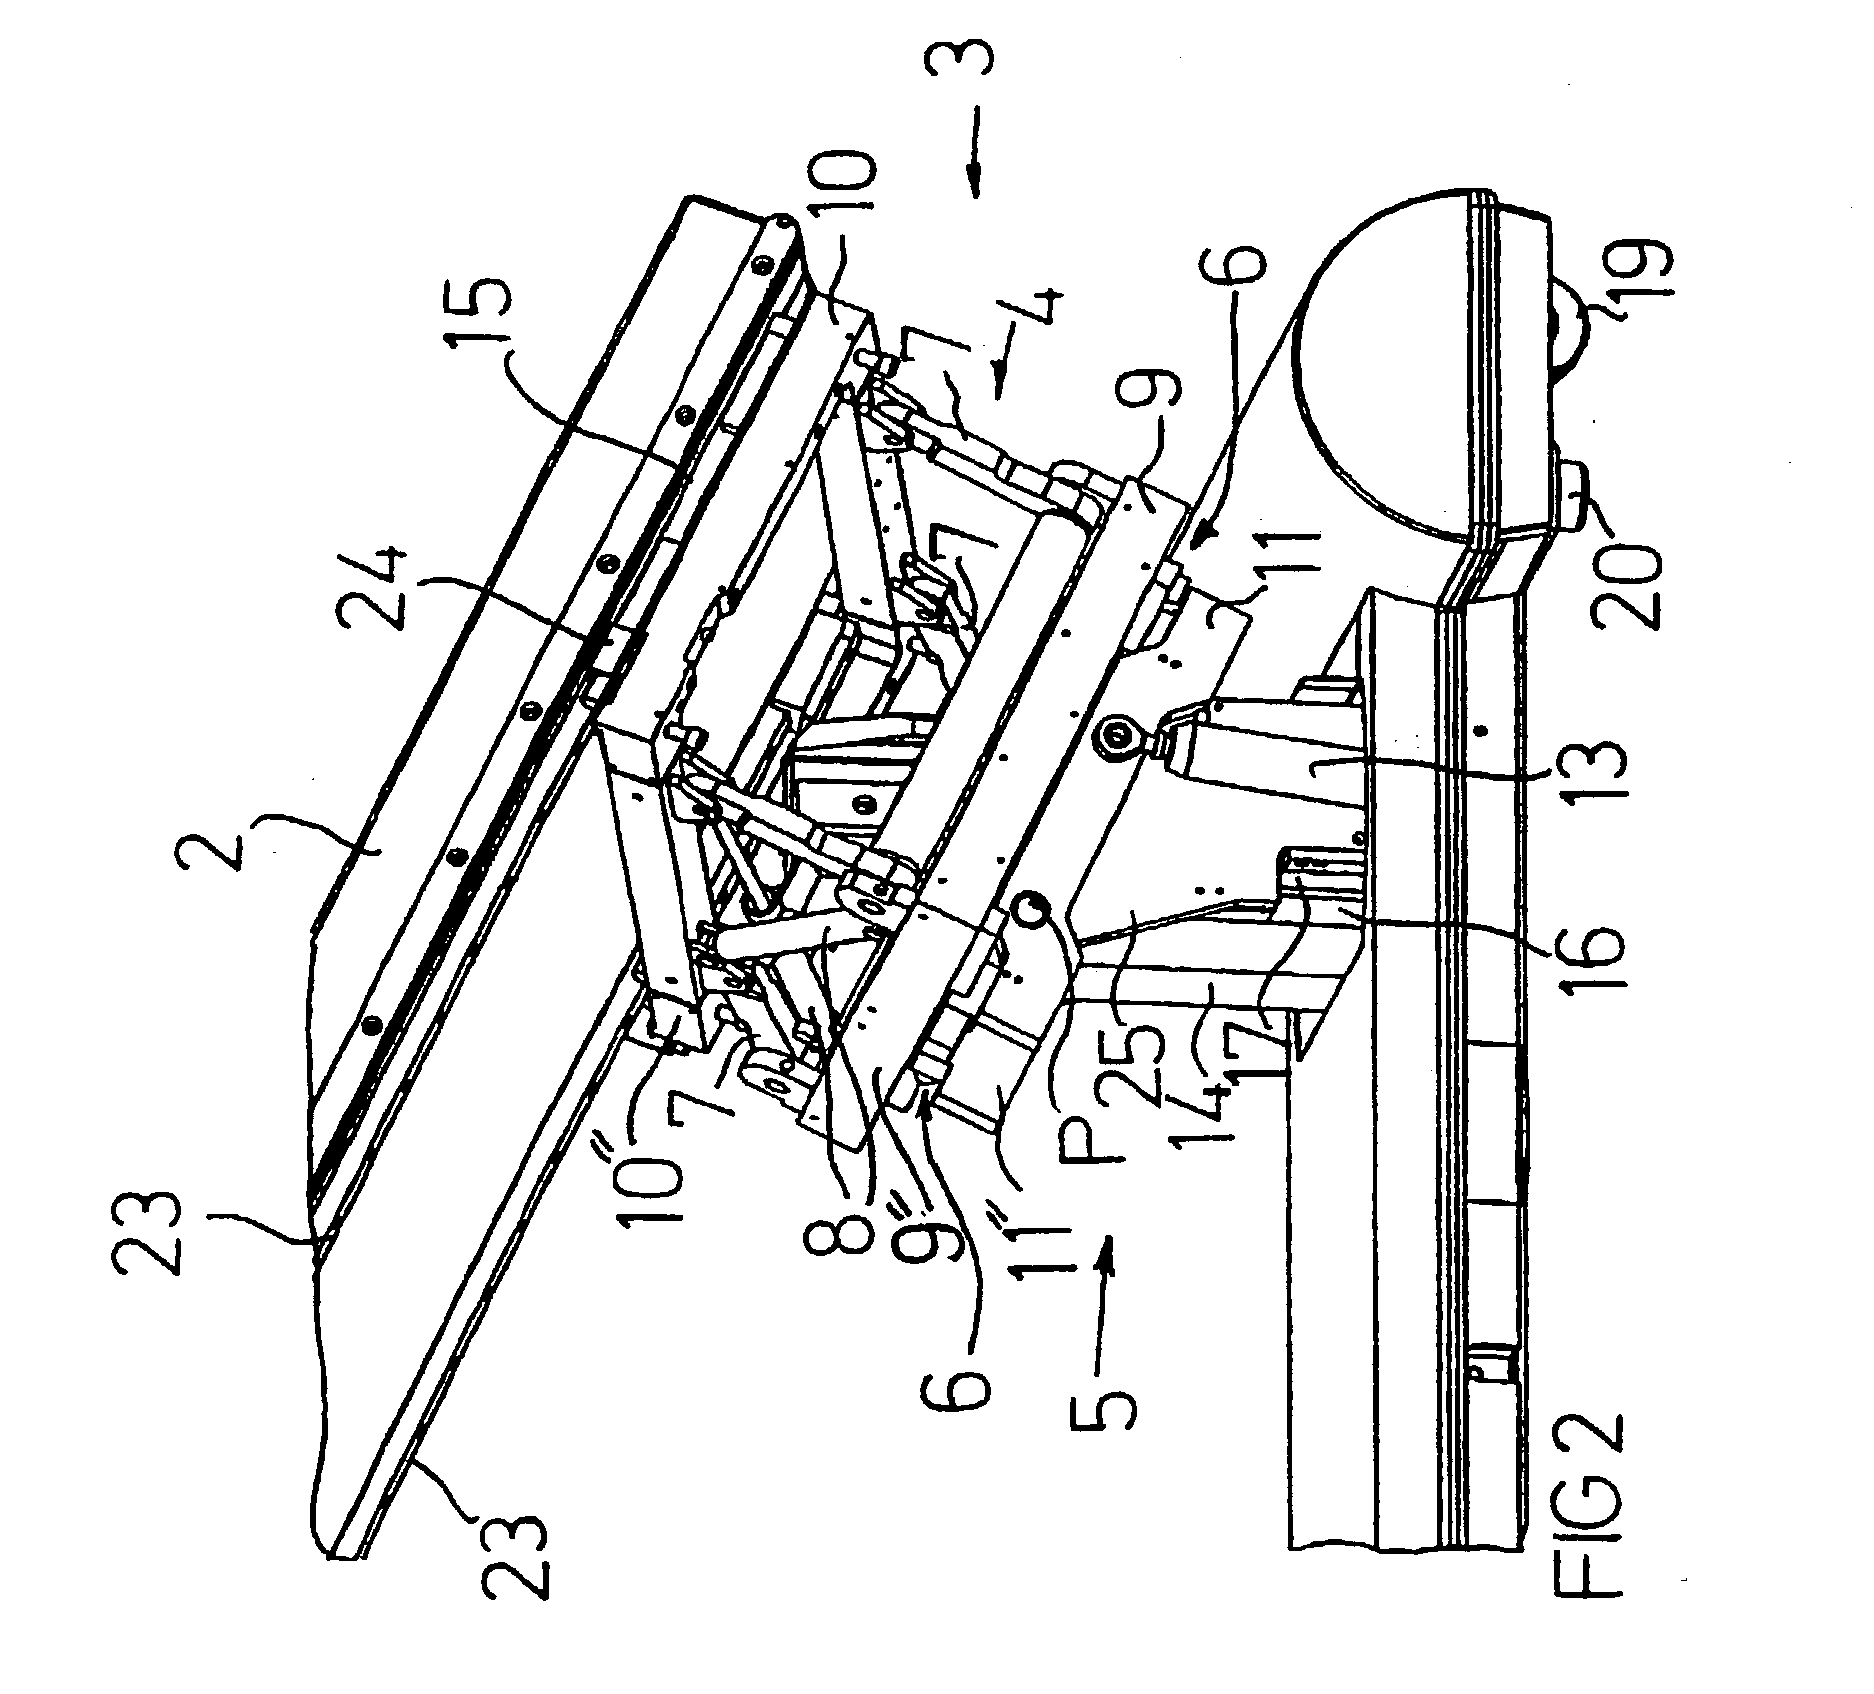 Surgical table with displacement arrangement